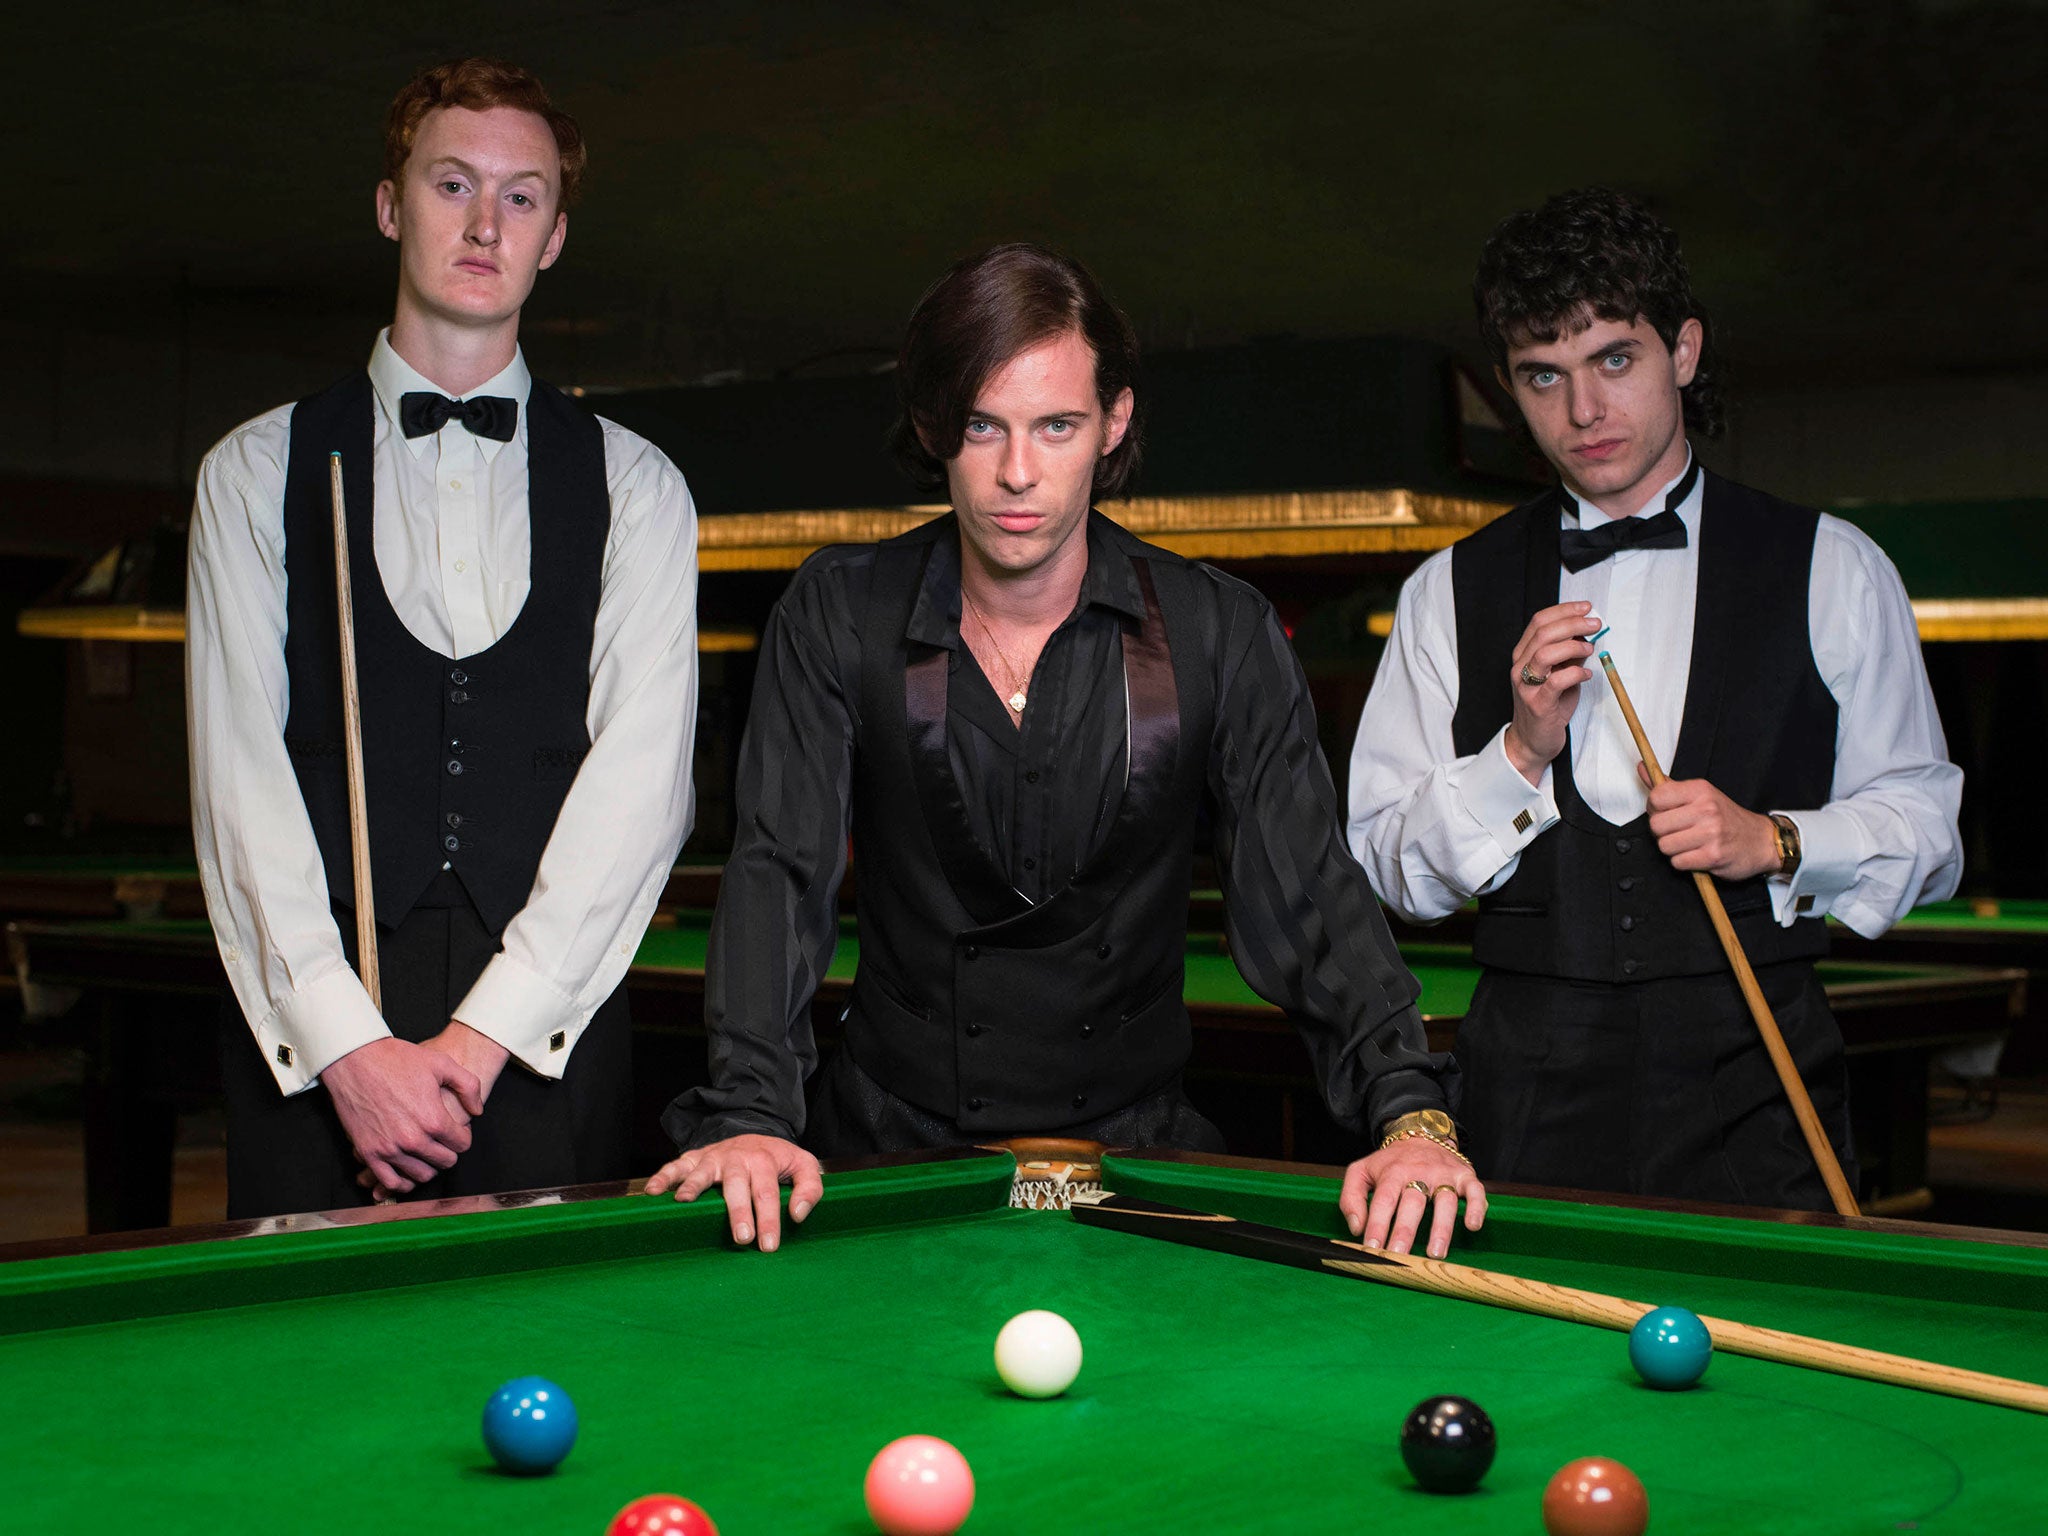 BBC iPlayers first comedy drama film will depict snooker rivalry between Alex Higgins and Steve Davis The Independent The Independent